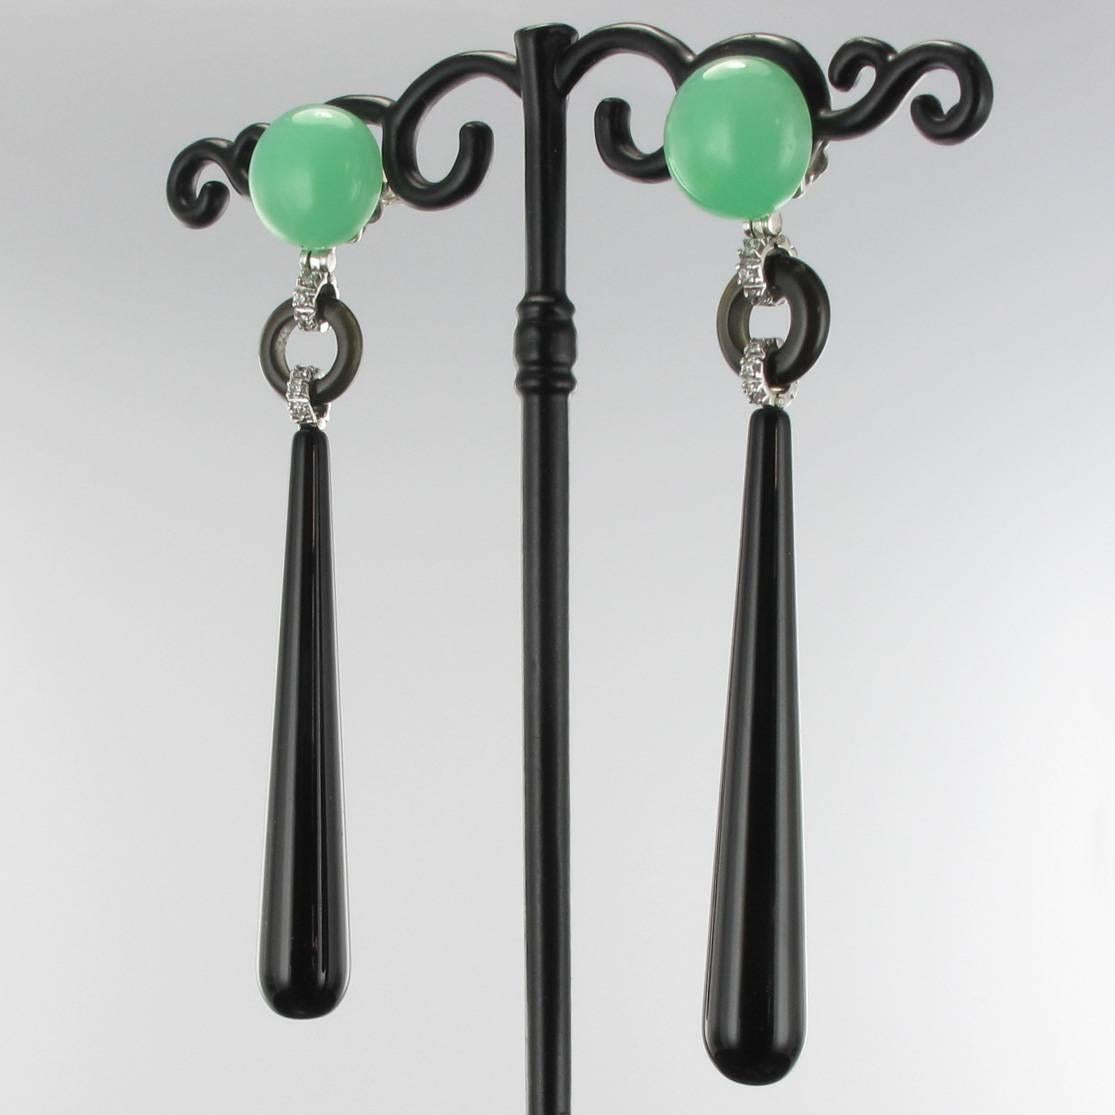 For pierced earrings.

Earrings in 18 carat white gold.

Each dangle earring is composed of a chrysoprase cabochon which holds a curved disc of onyx set with a line of brilliant-cut diamonds itself retaining a drop of onyx. The clasp is a large